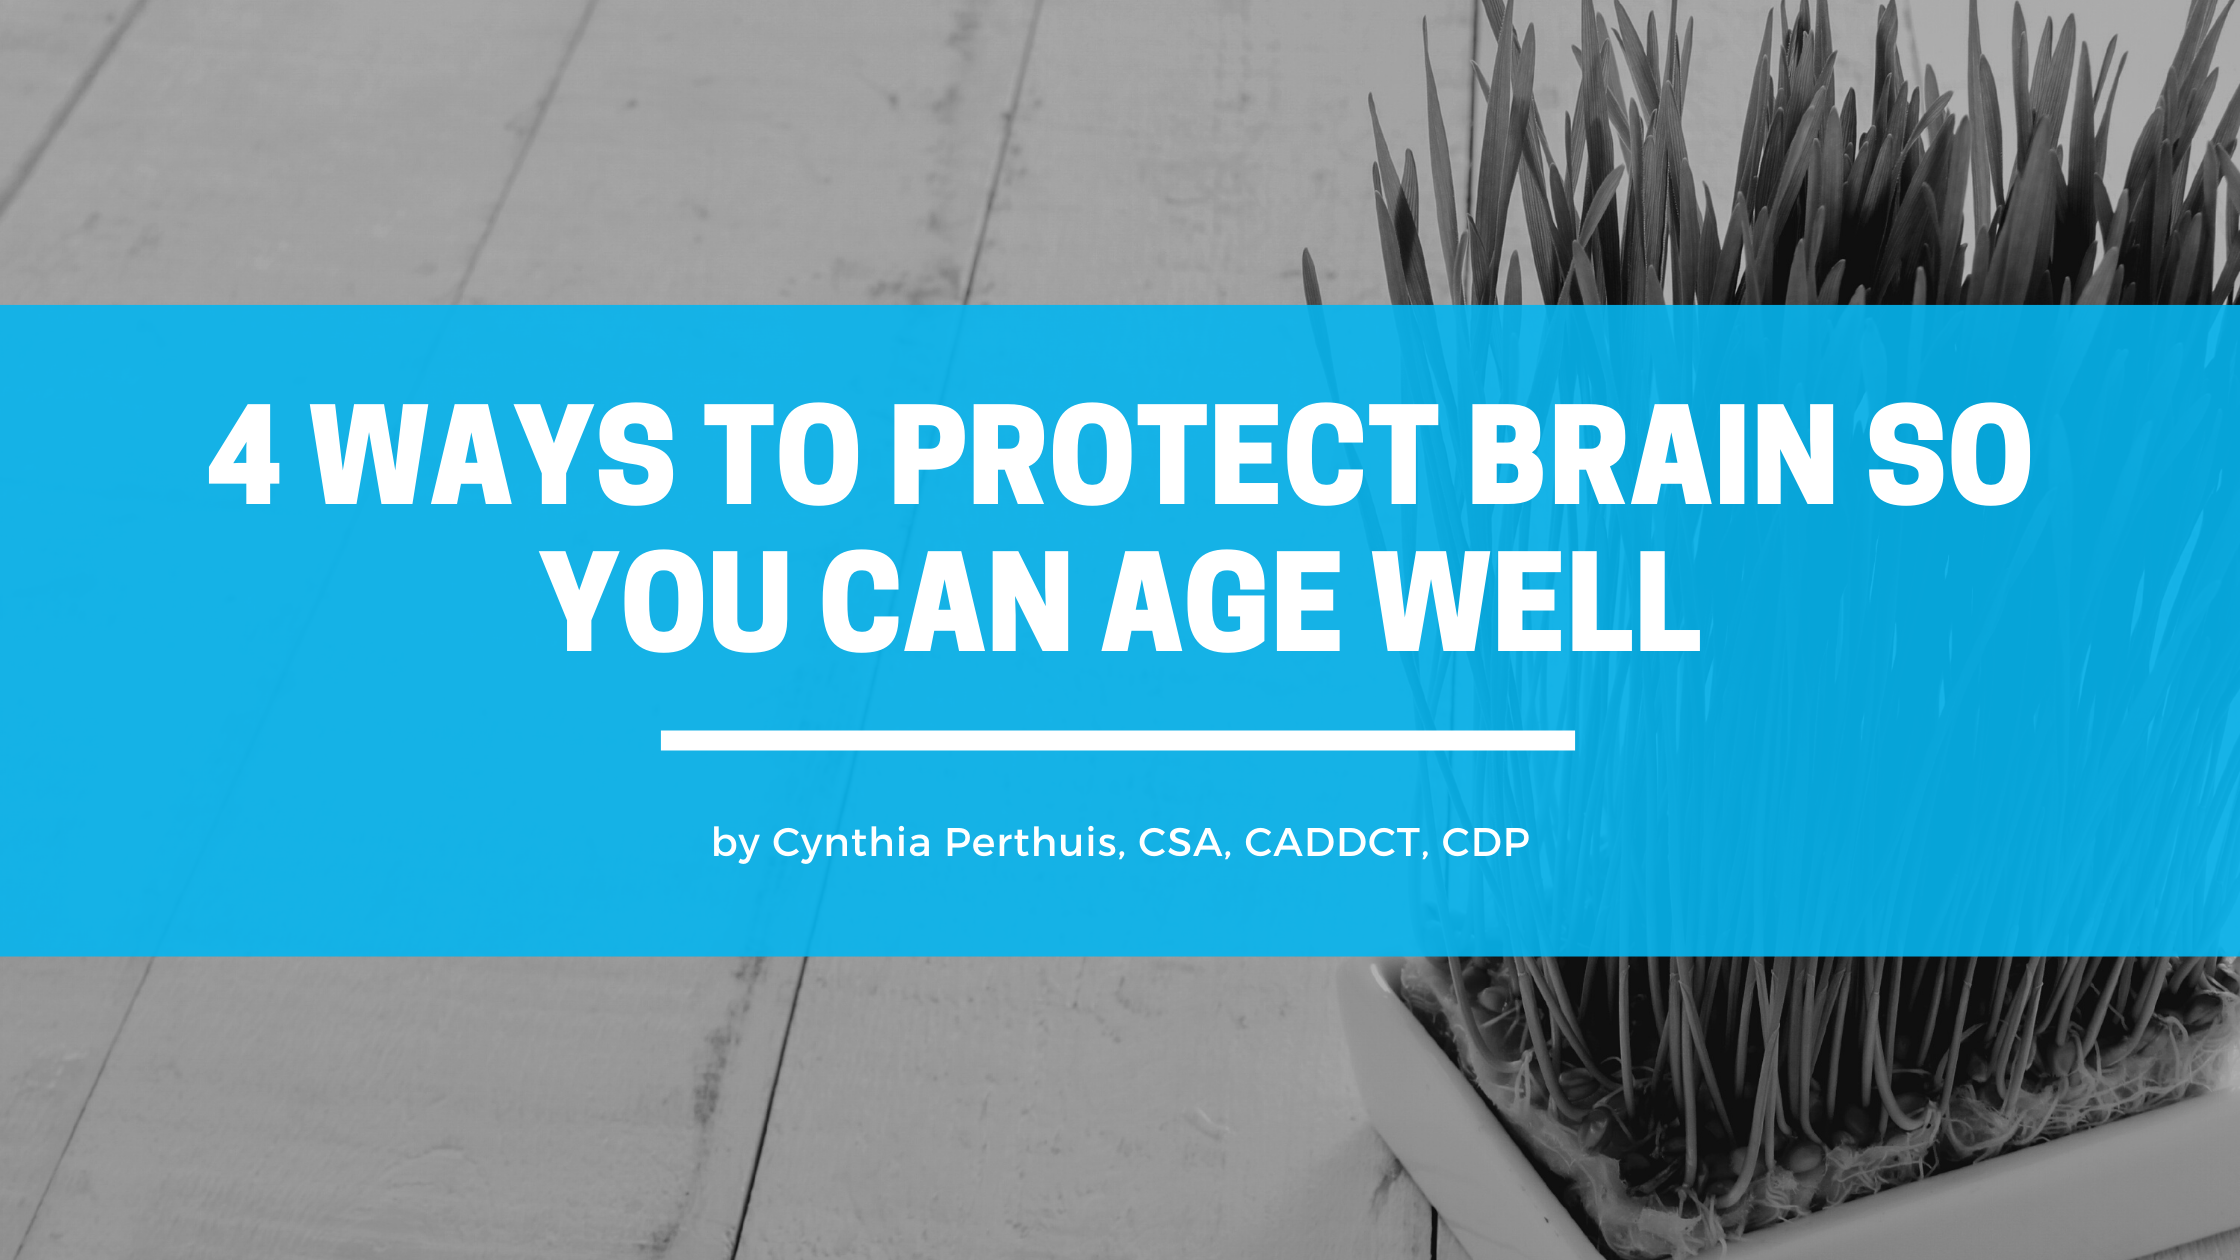 4 Ways To Protect Your Brain So You Can Age Well